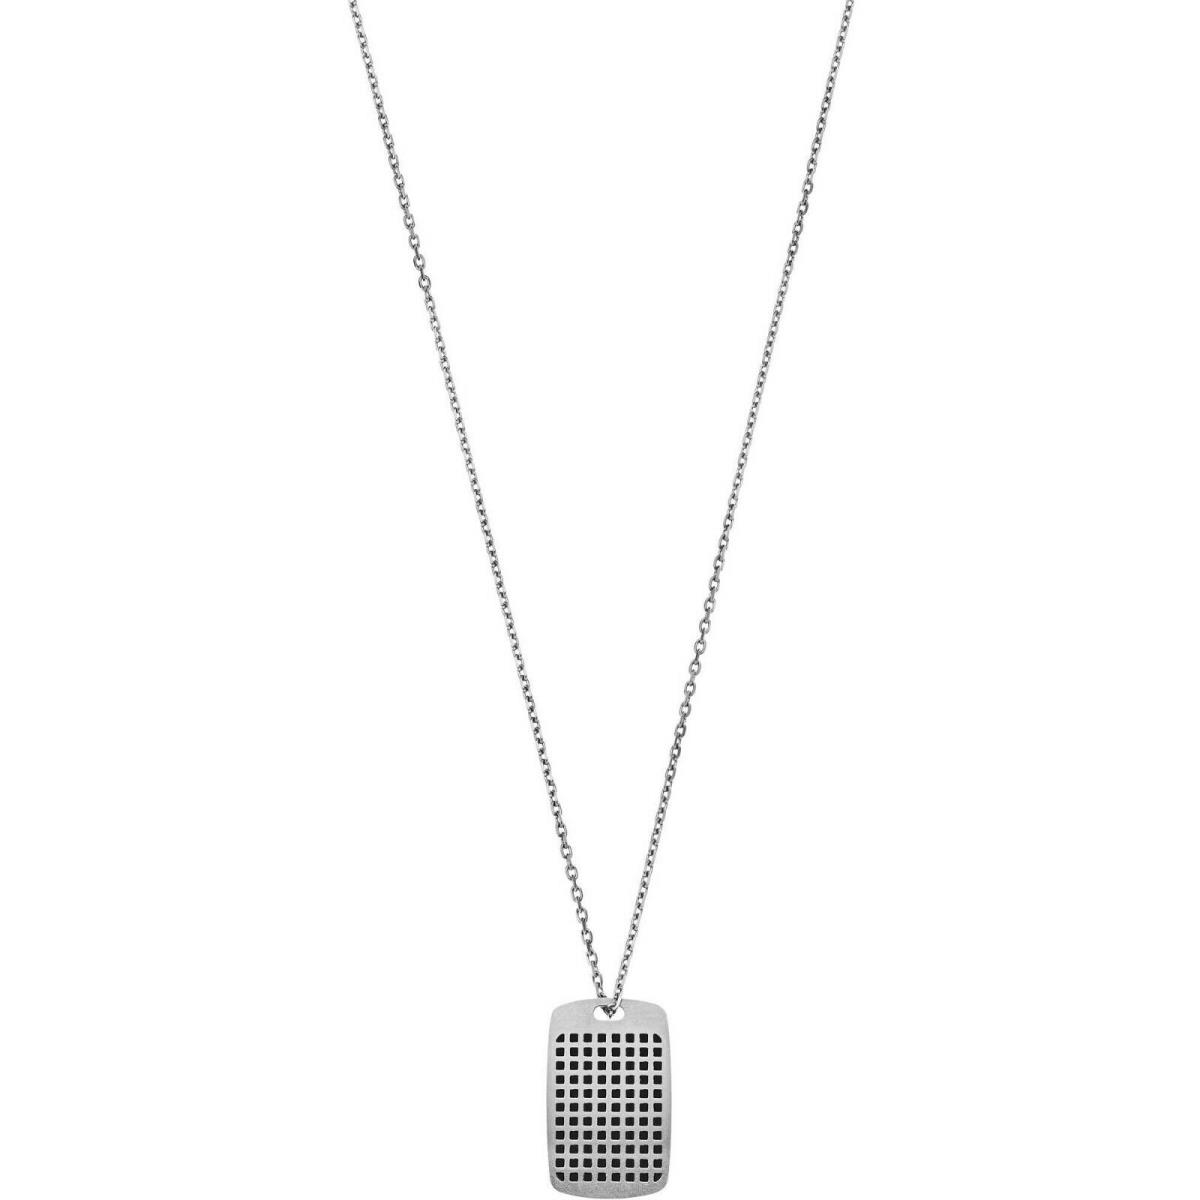 Emporio Armani Silver+black 2 Tone 2 Sided Charm Chain NECKLACE-EGS2116040